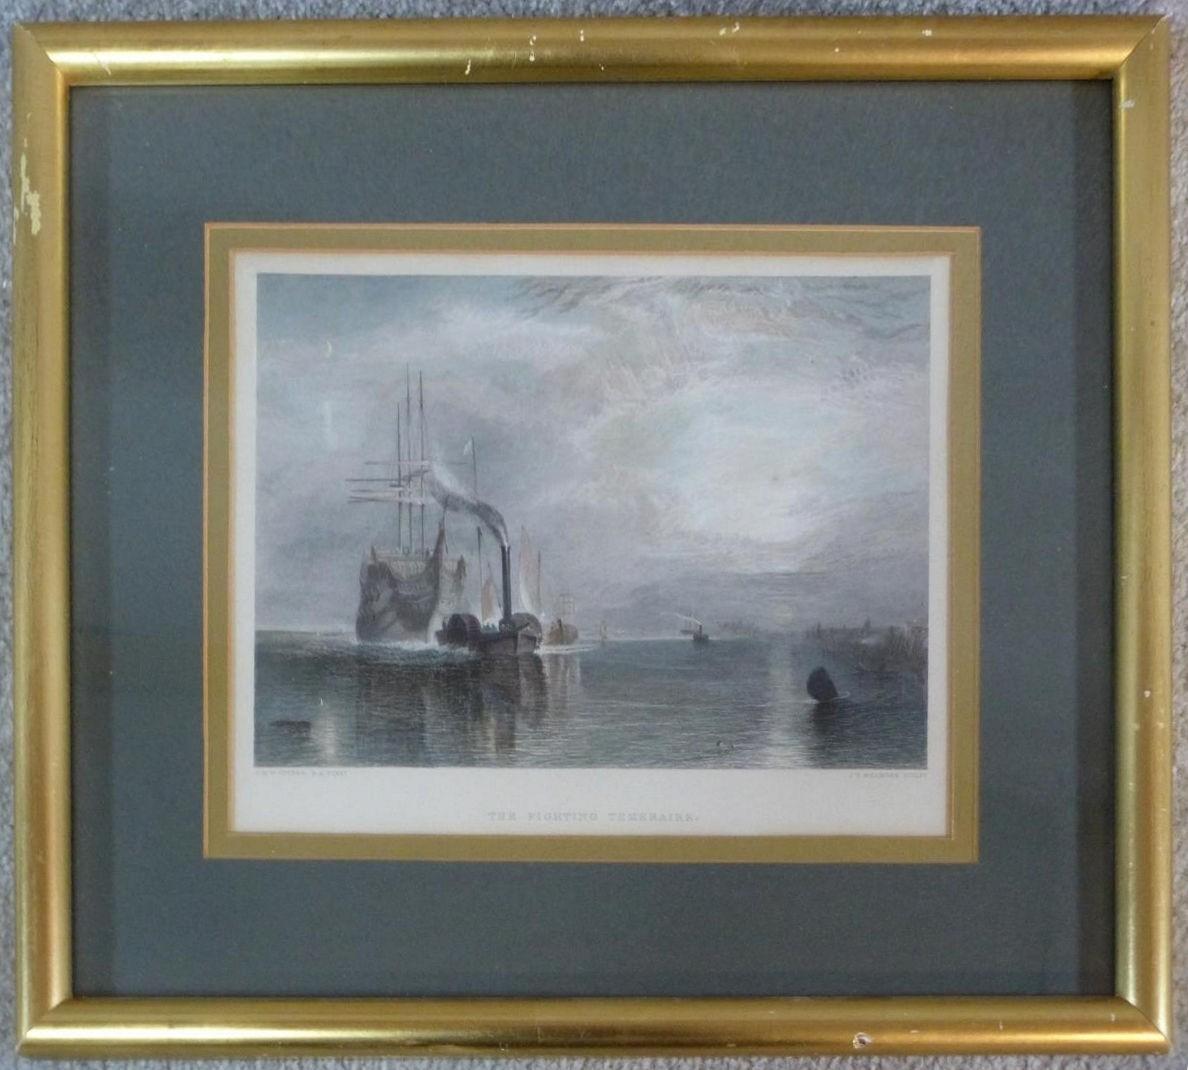 After Turner, The Fighting Temeraire, a 19th century framed and glazed hand coloured engraving, J - Image 2 of 5